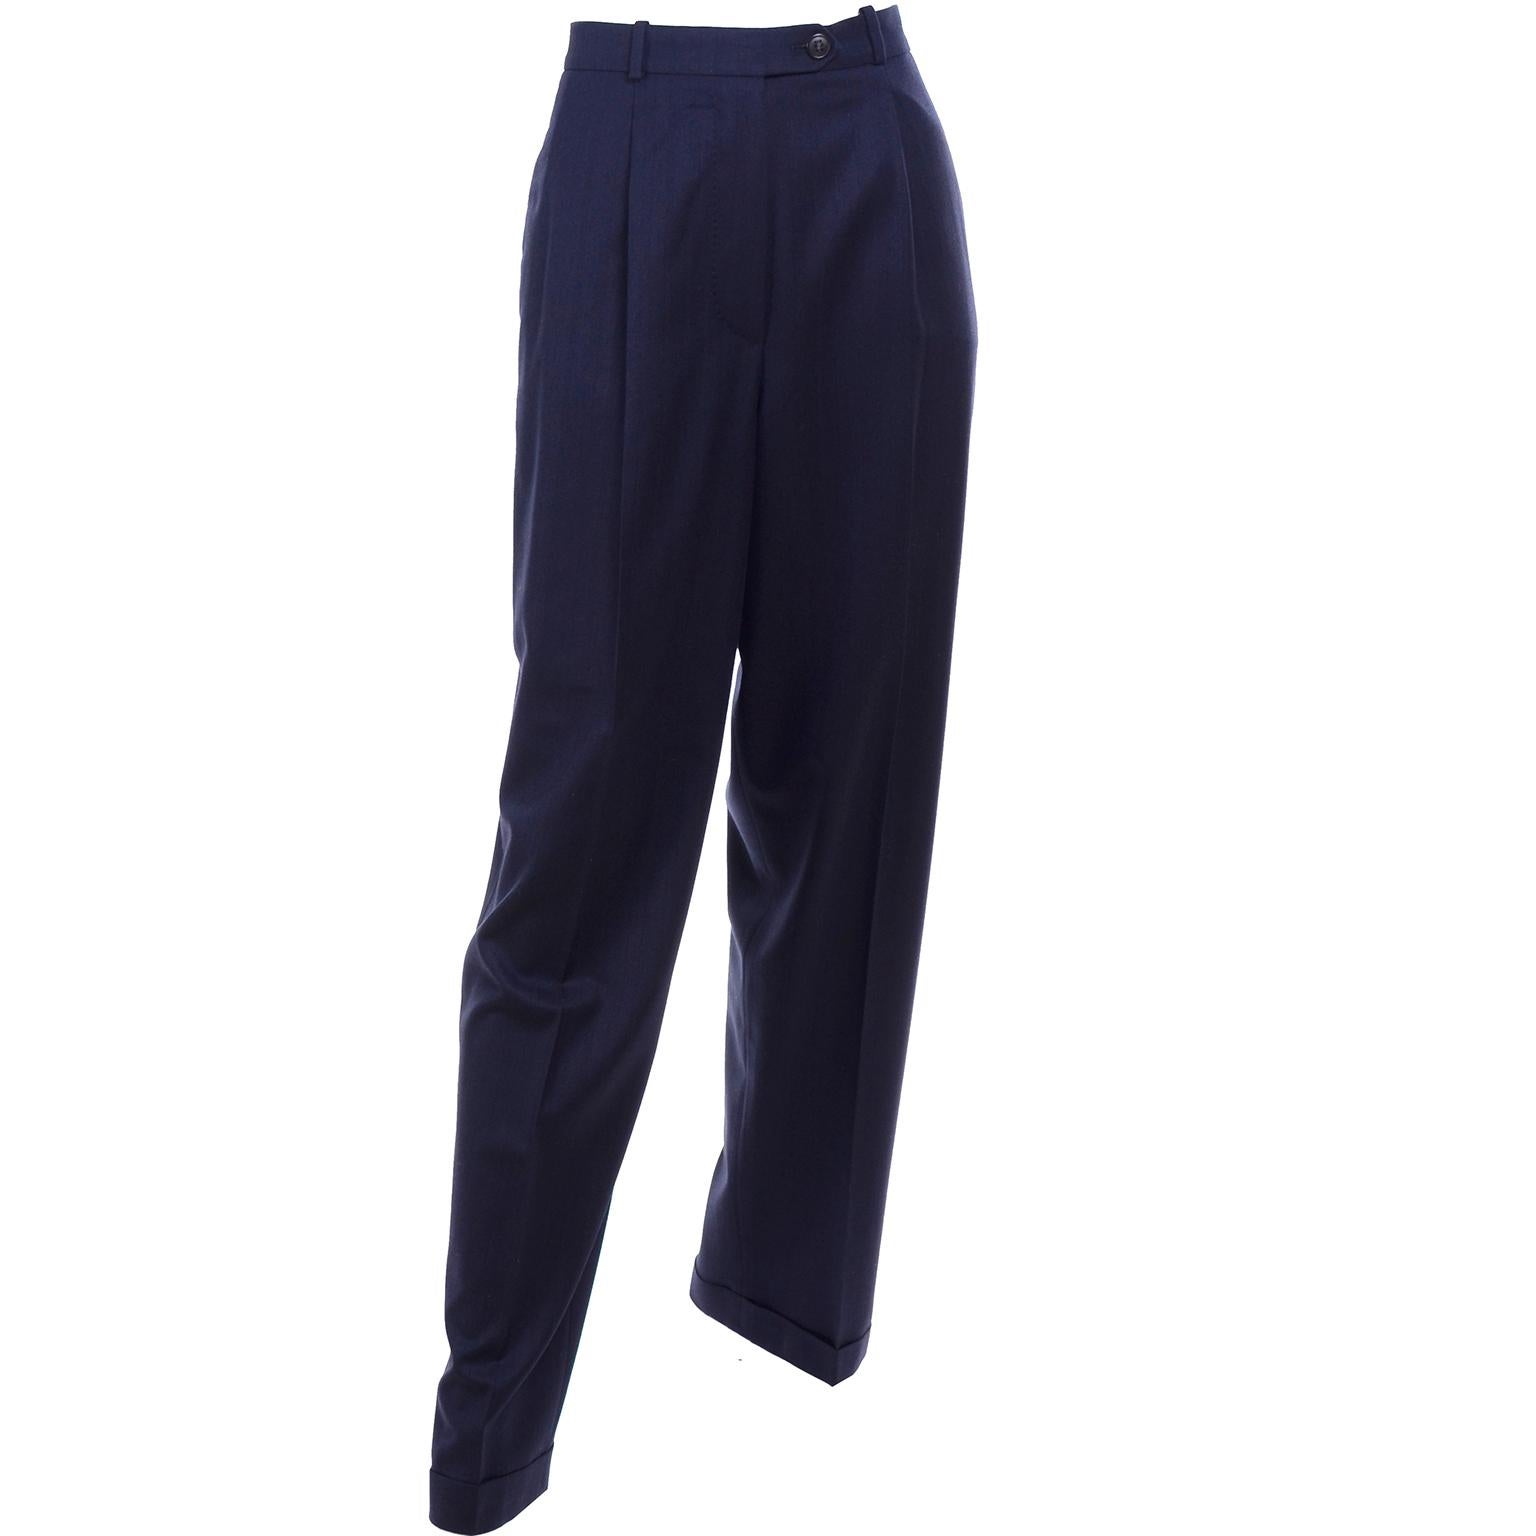 Hermes Navy Blue High Waisted Cuffed Trouser Pants Size 38